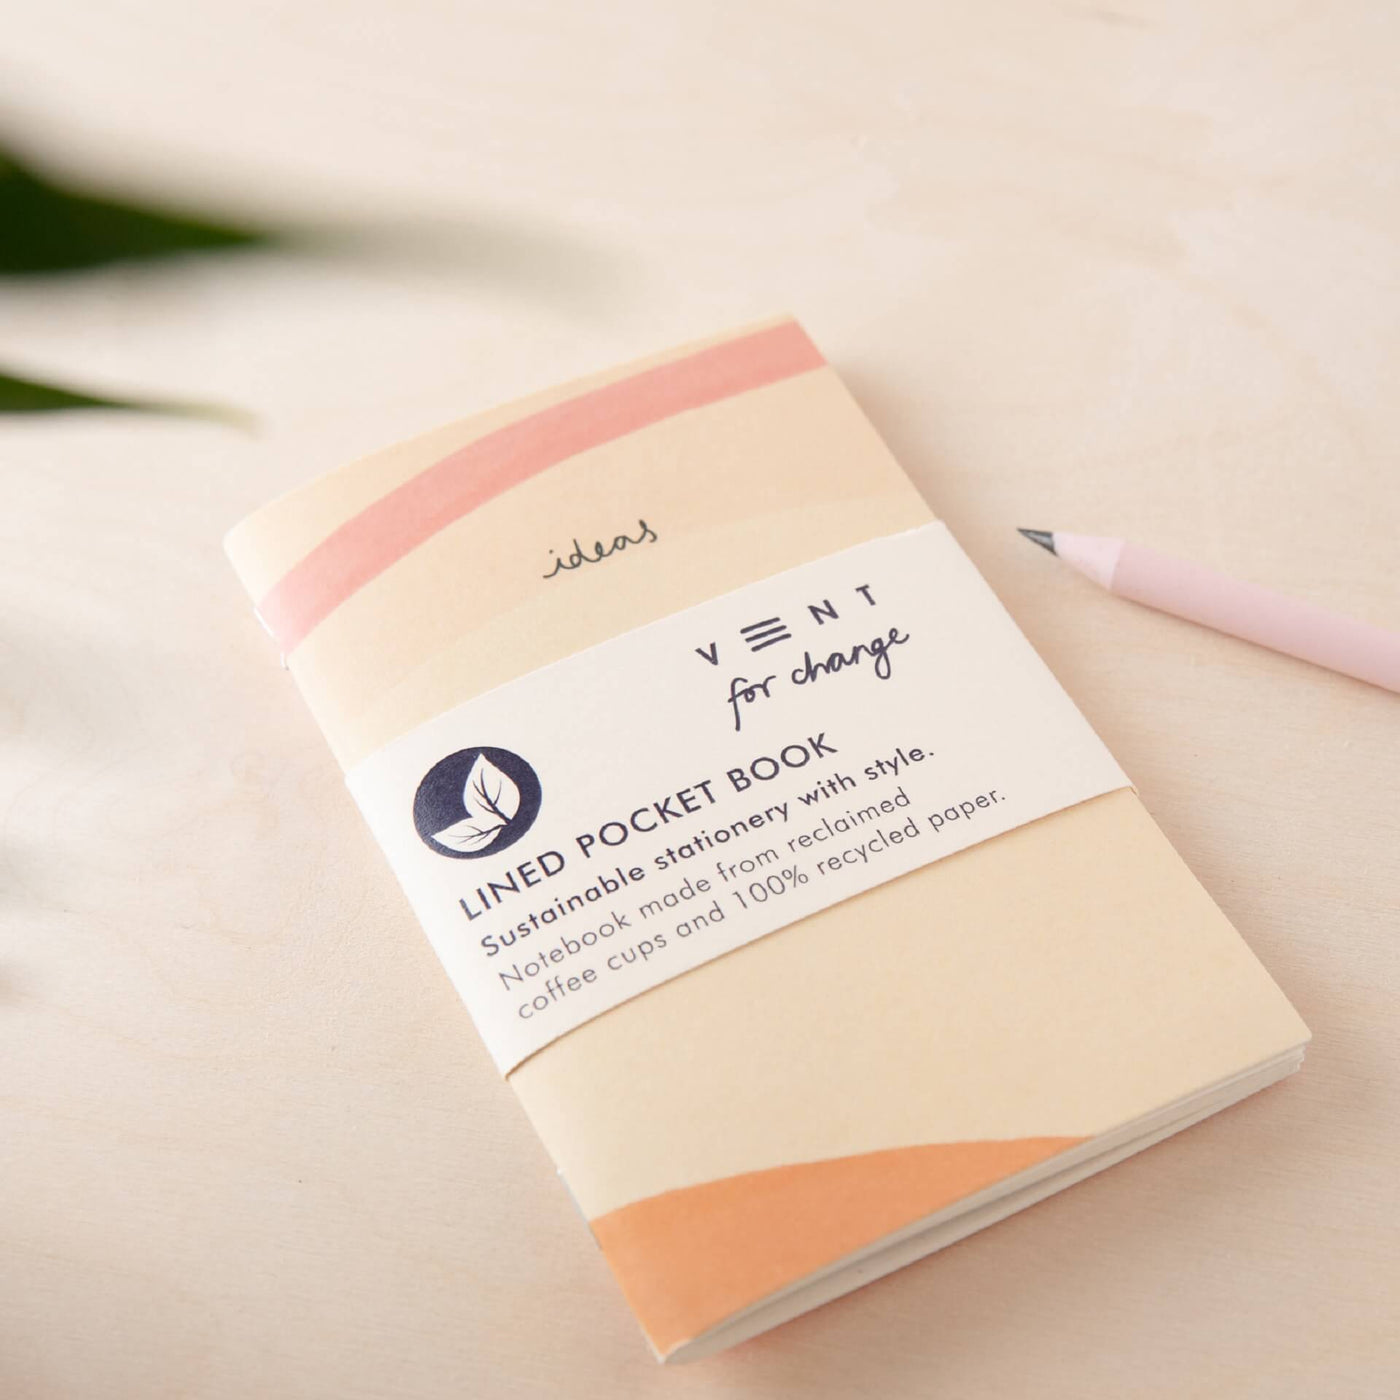 A6 Sustainable stationery light pink ideas lined pocket book from Vent 4 change